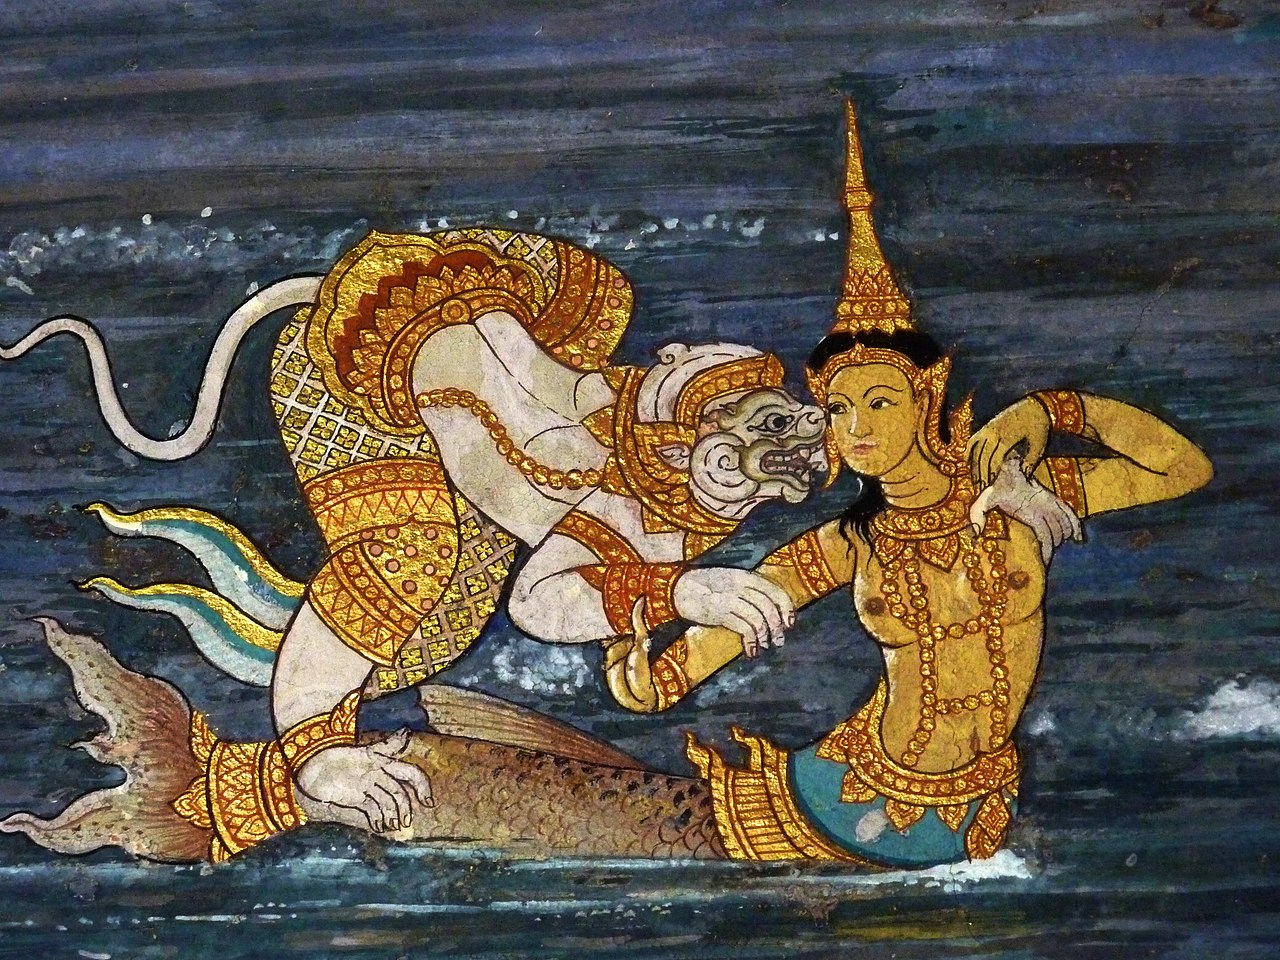 a mermaid is visited by a Hindu demon. Both are dressed in Thai Buddhist attire.